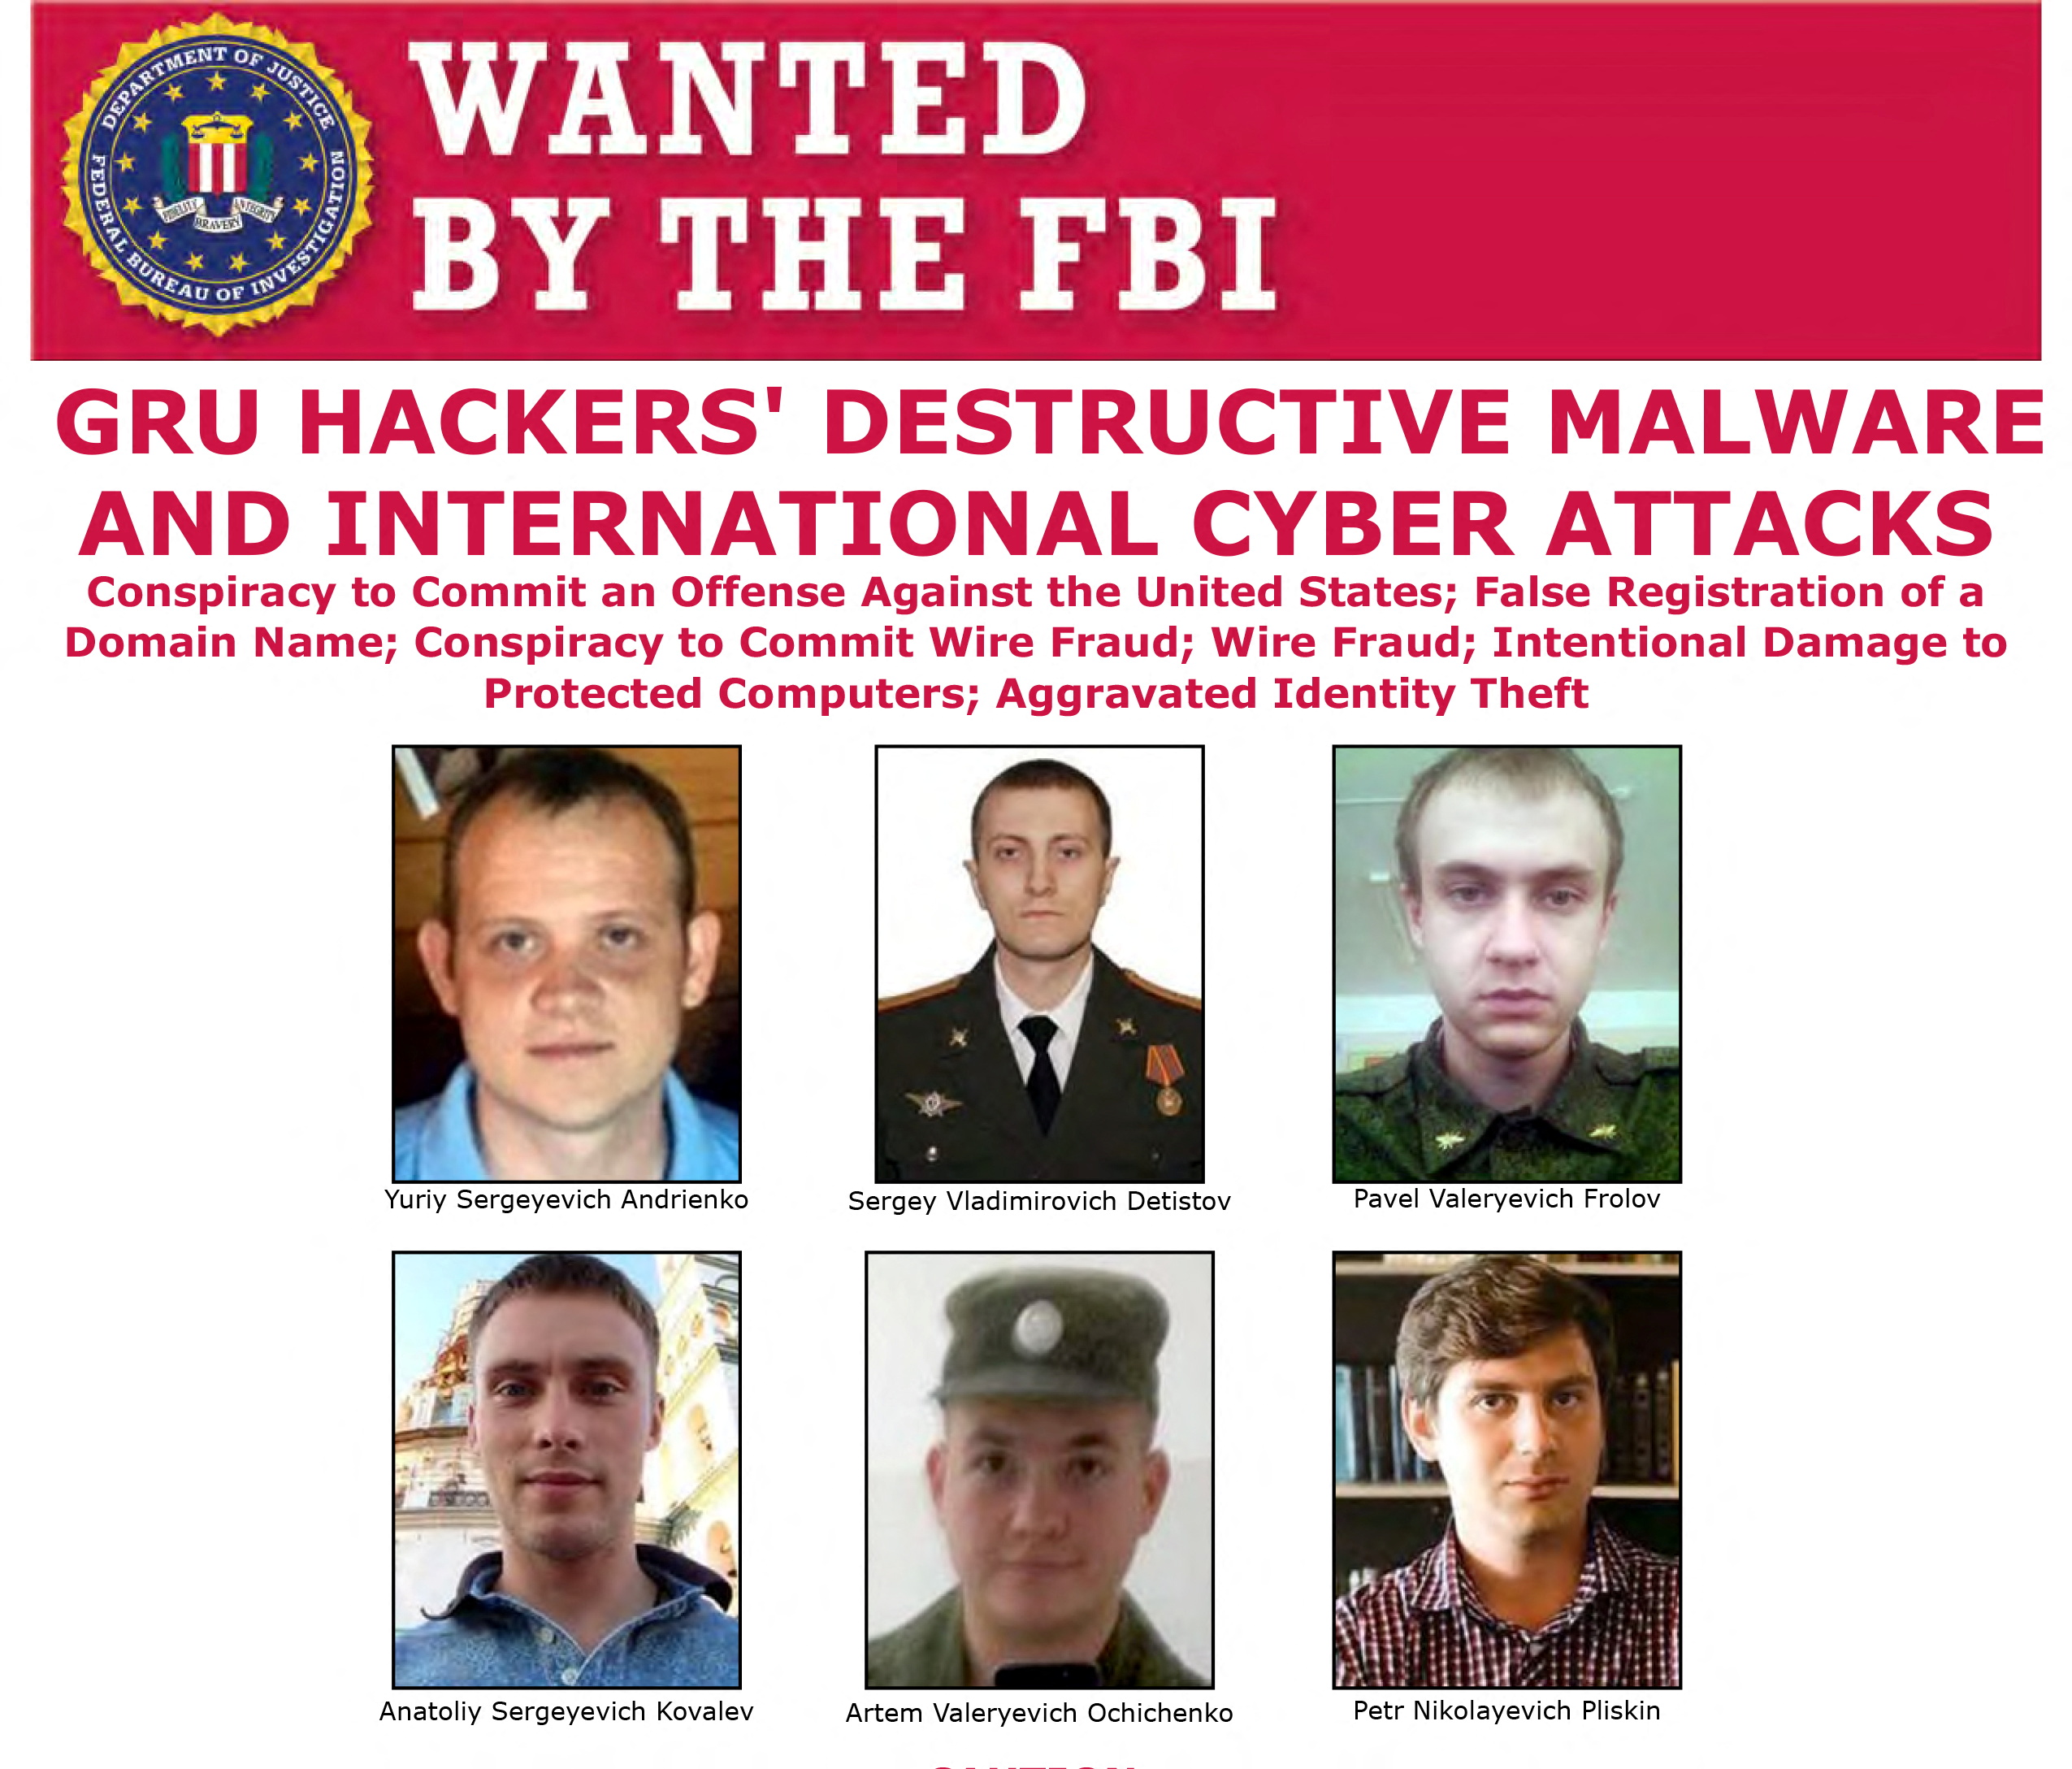 FBI poster showing six wanted Russian military intelligent officers